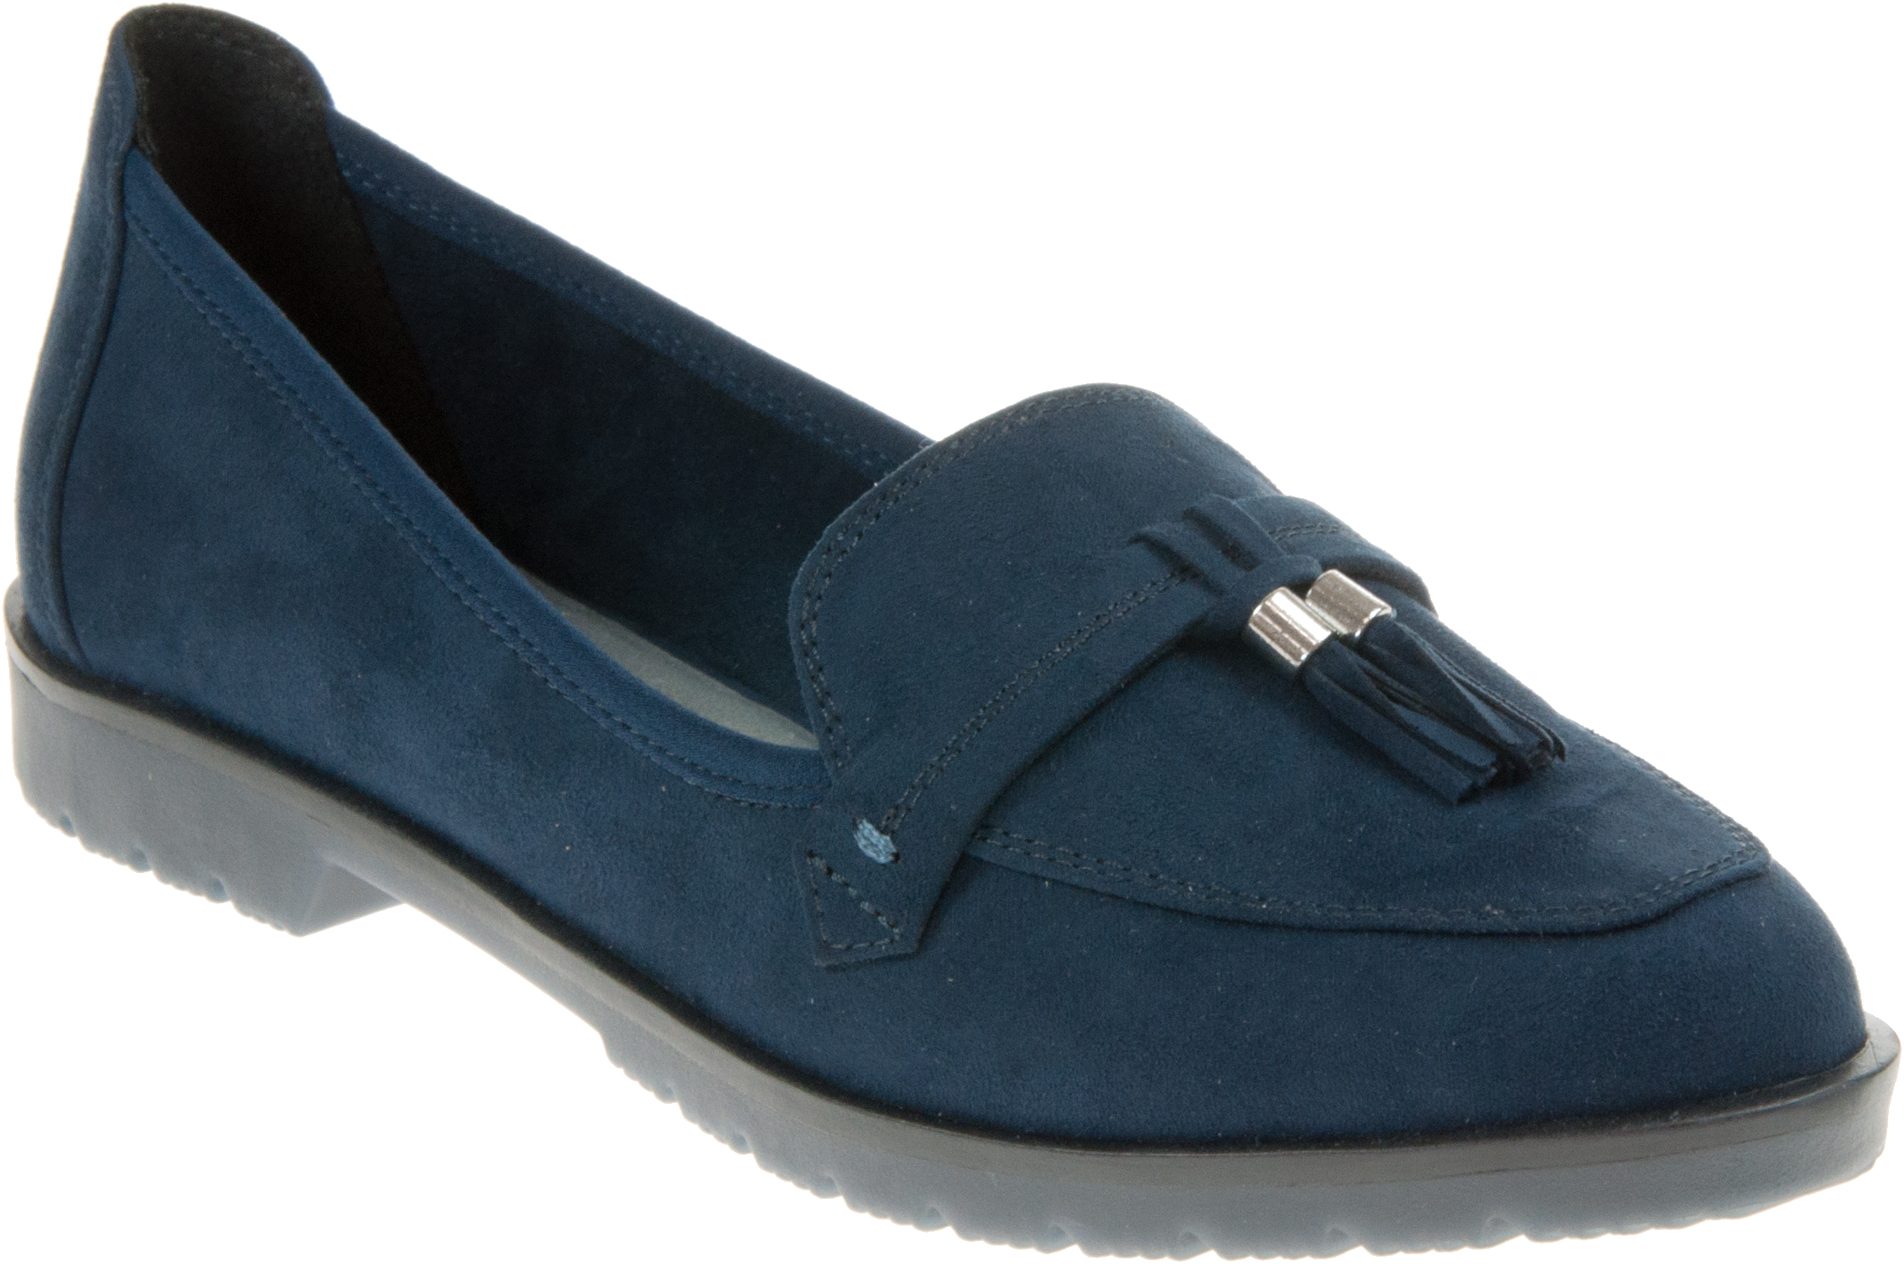 Marco Tozzi 24604-26 Navy 24604-26 805 - Everyday Shoes - Humphries Shoes